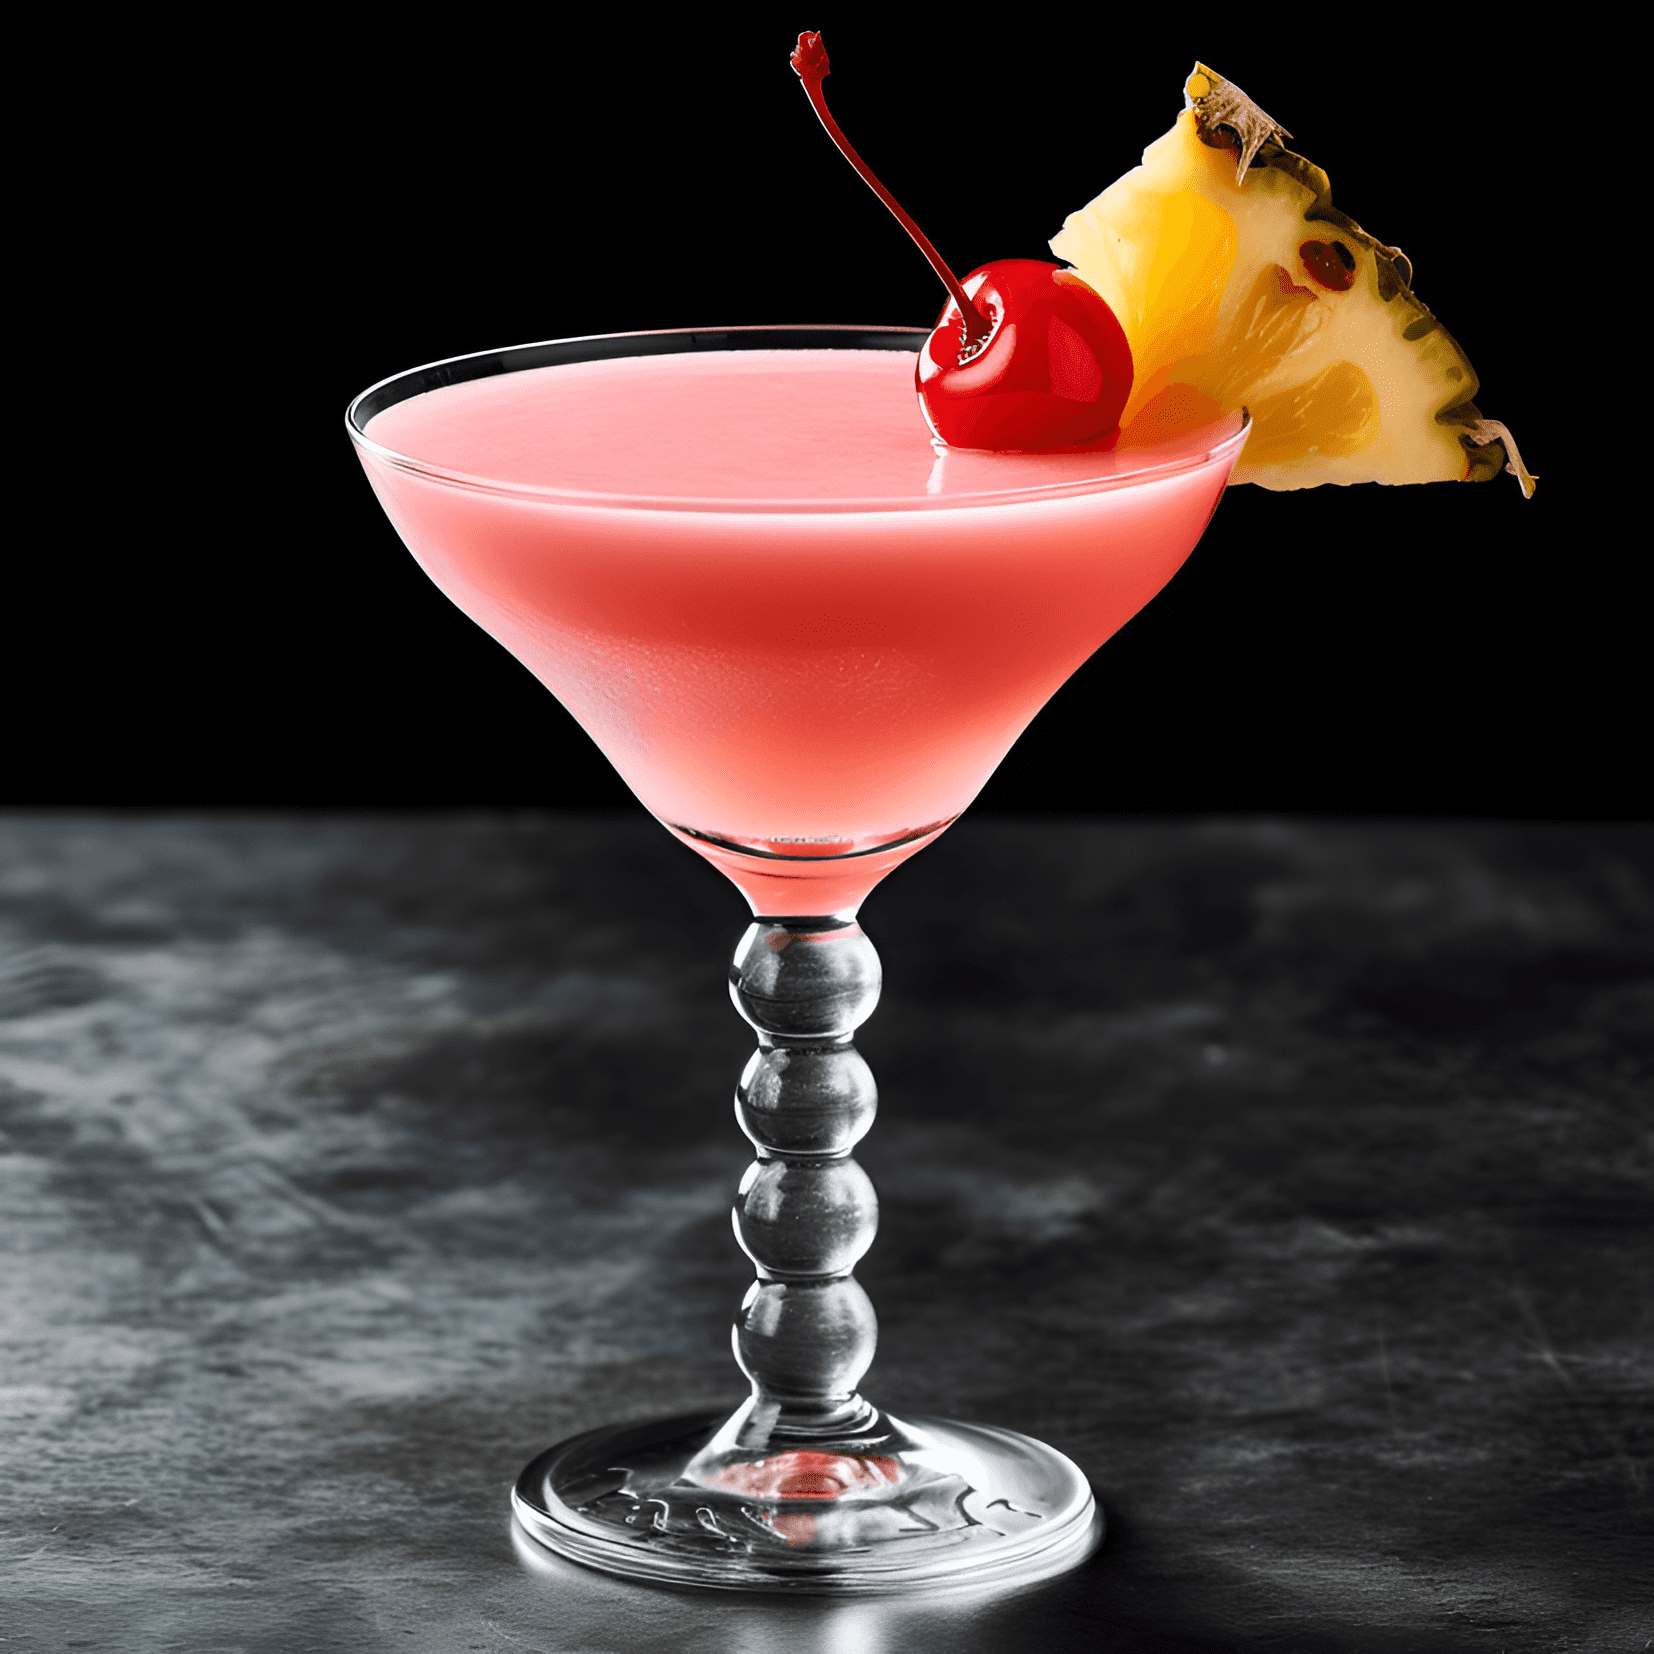 Princess Cocktail Recipe - The Princess Cocktail is a delightful combination of sweet, sour, and fruity flavors. The gin provides a strong, herbal base, while the pineapple juice adds a tropical sweetness. The lemon juice balances the sweetness with a refreshing tartness, and the grenadine gives the drink a hint of berry flavor.